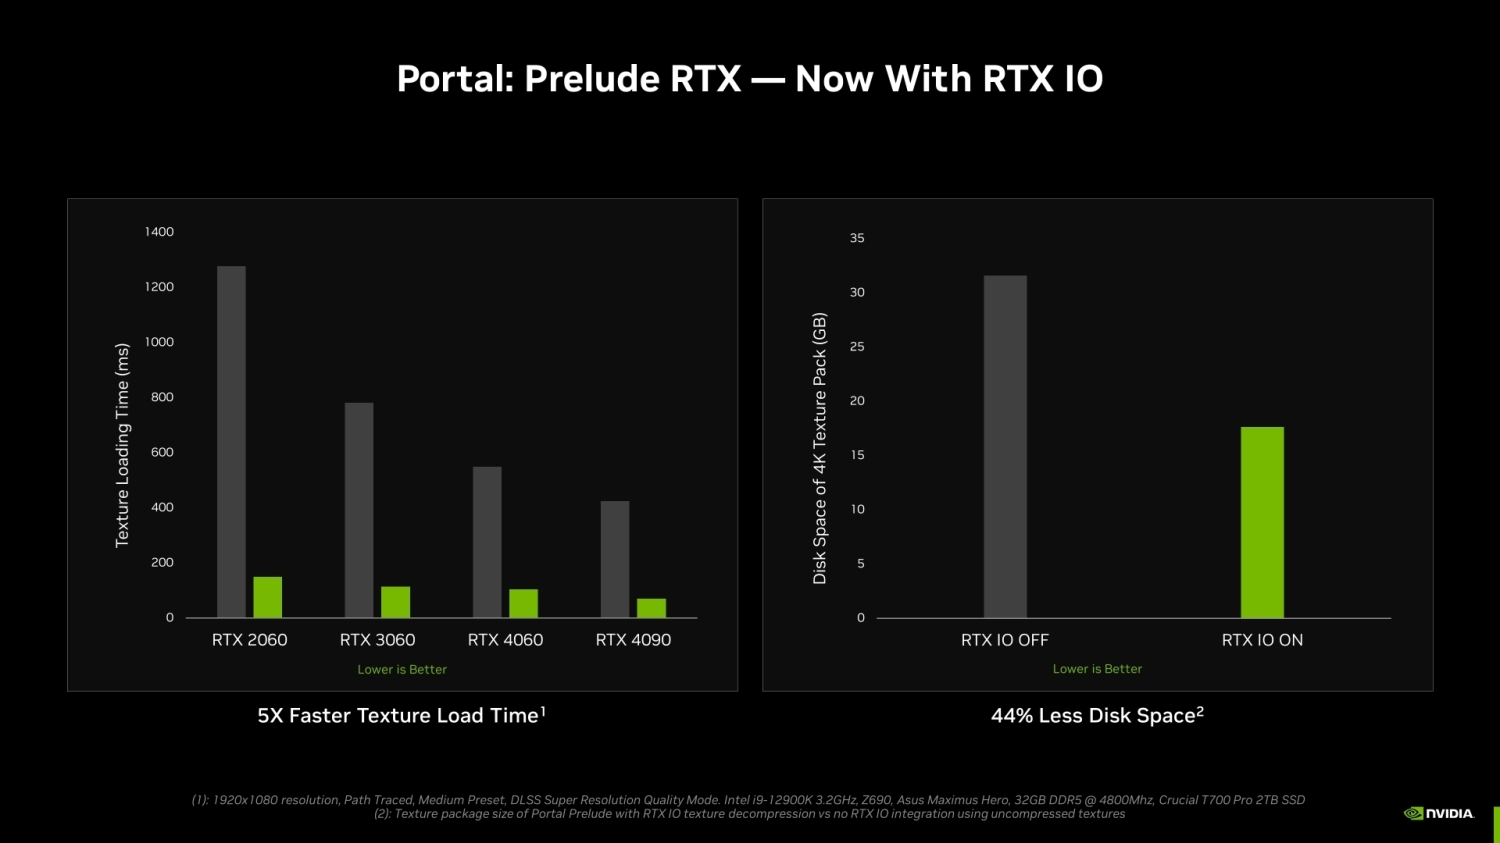 TweakTown Enlarged Image - NVIDIA RTX IO dramatically improves load times in Portal: Prelude RTX, image credit: NVIDIA.